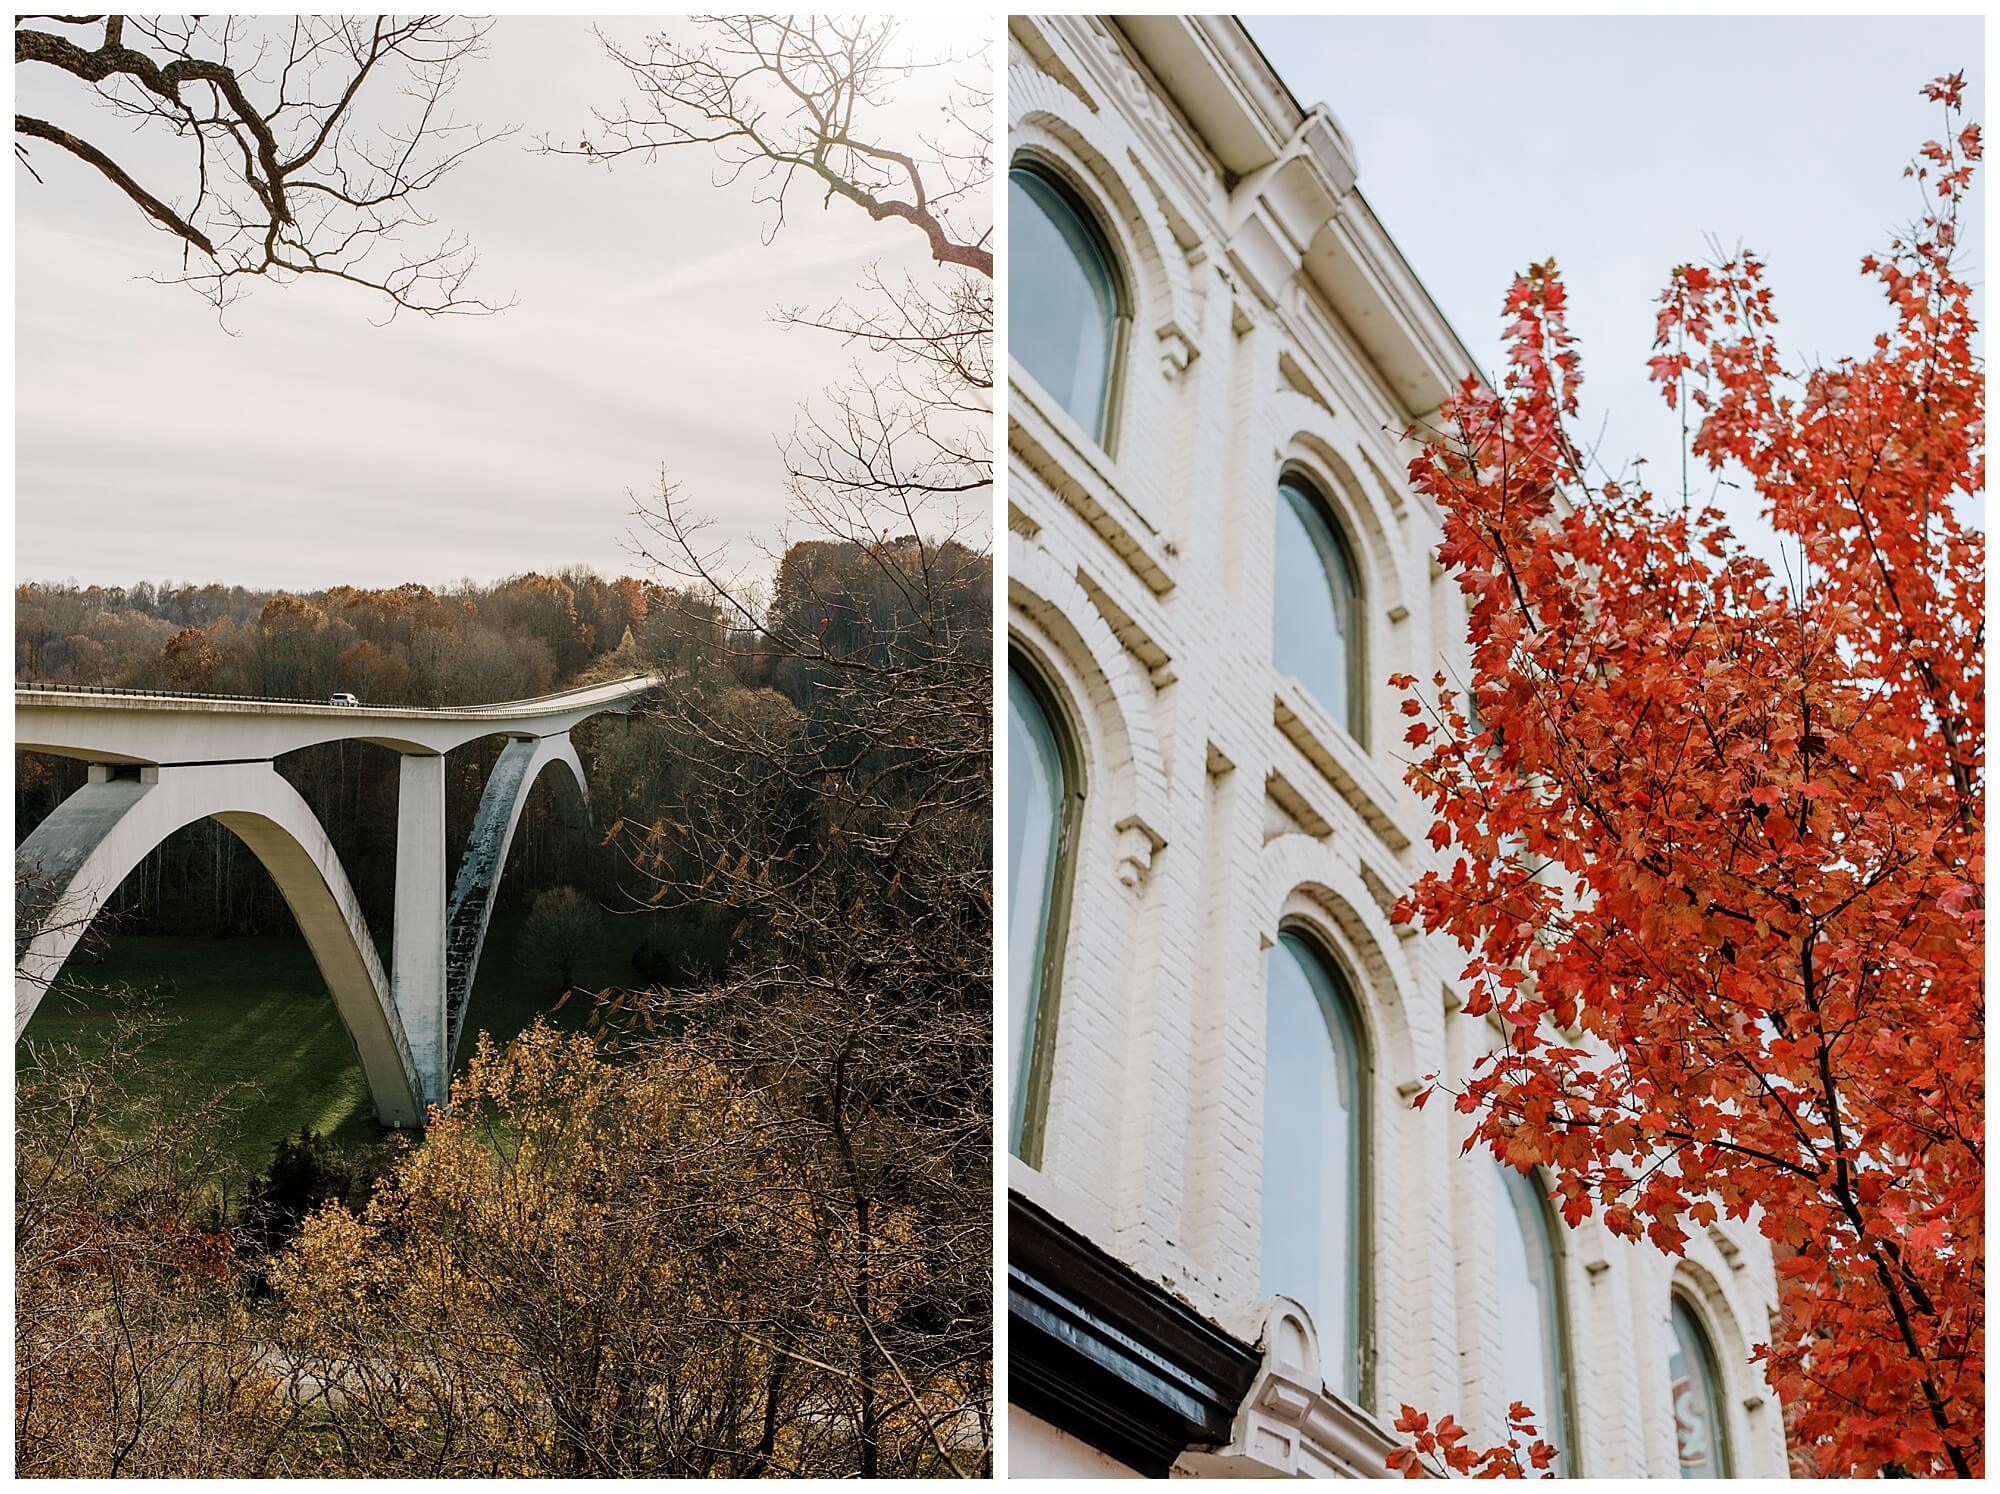 Left: the Natchez Trace Parkway Bridge stretches across and above the state route 96 at sunset. Right: bright red fall leaves next to a white, old-fashioned brick building in Franklin, Tennessee at sunset.